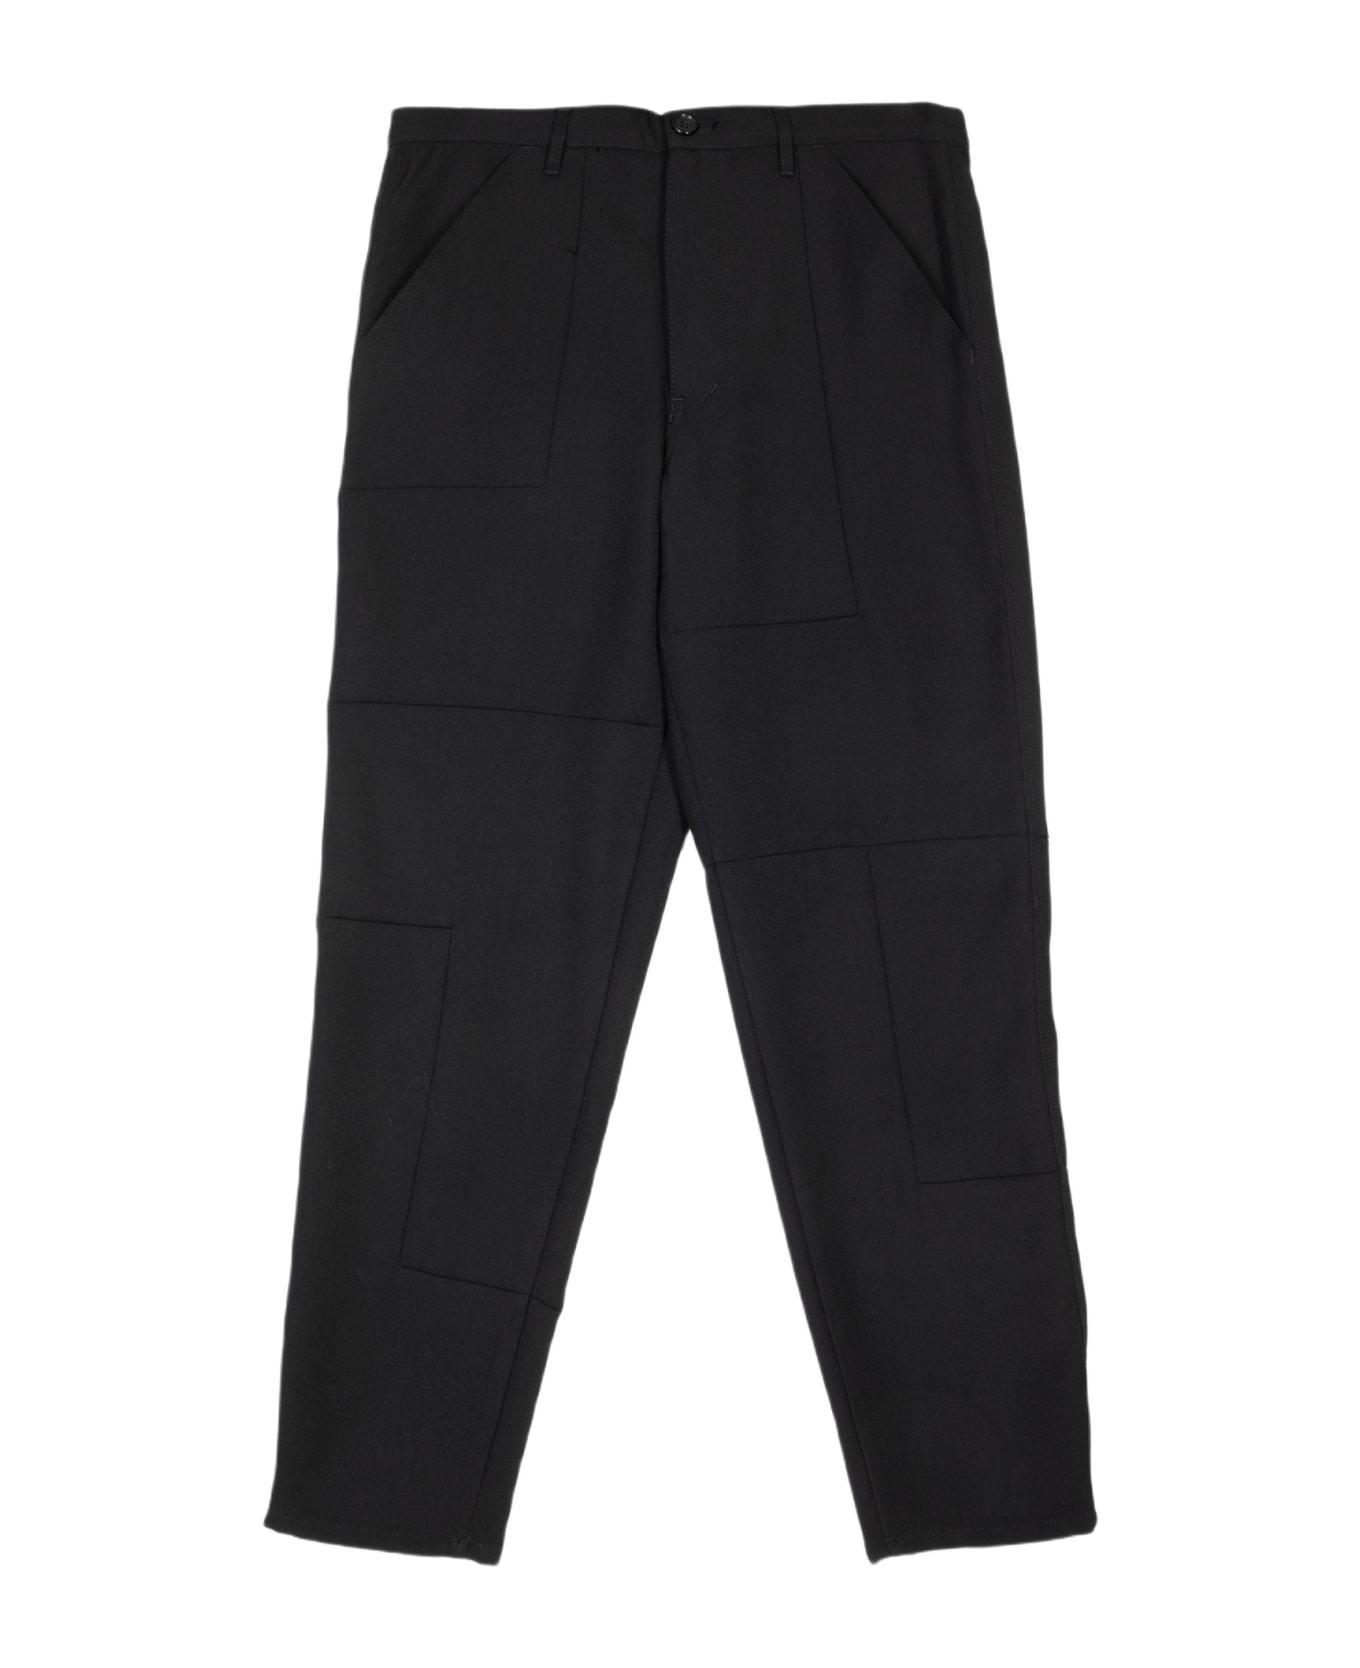 Comme des Garçons Shirt Mens Pants Woven Black wool patchwork tapered pant - Nero ボトムス